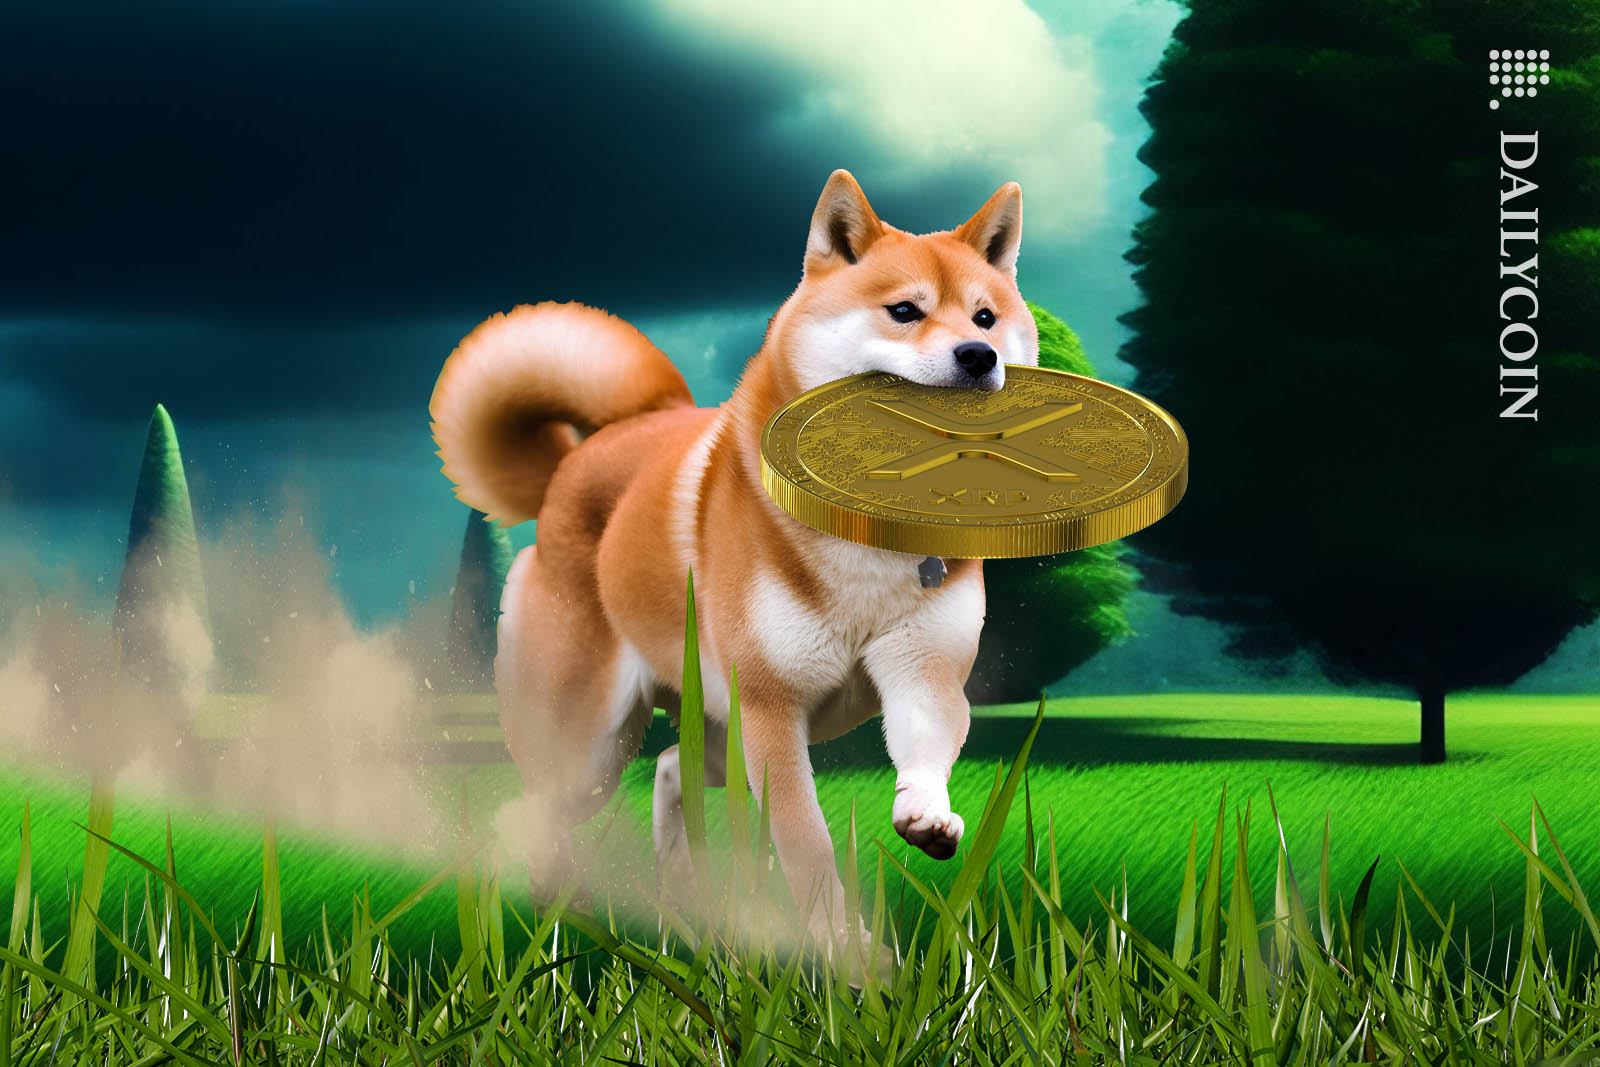 Doge dog running in a dreamy green field with an XRP coin in its mouth.